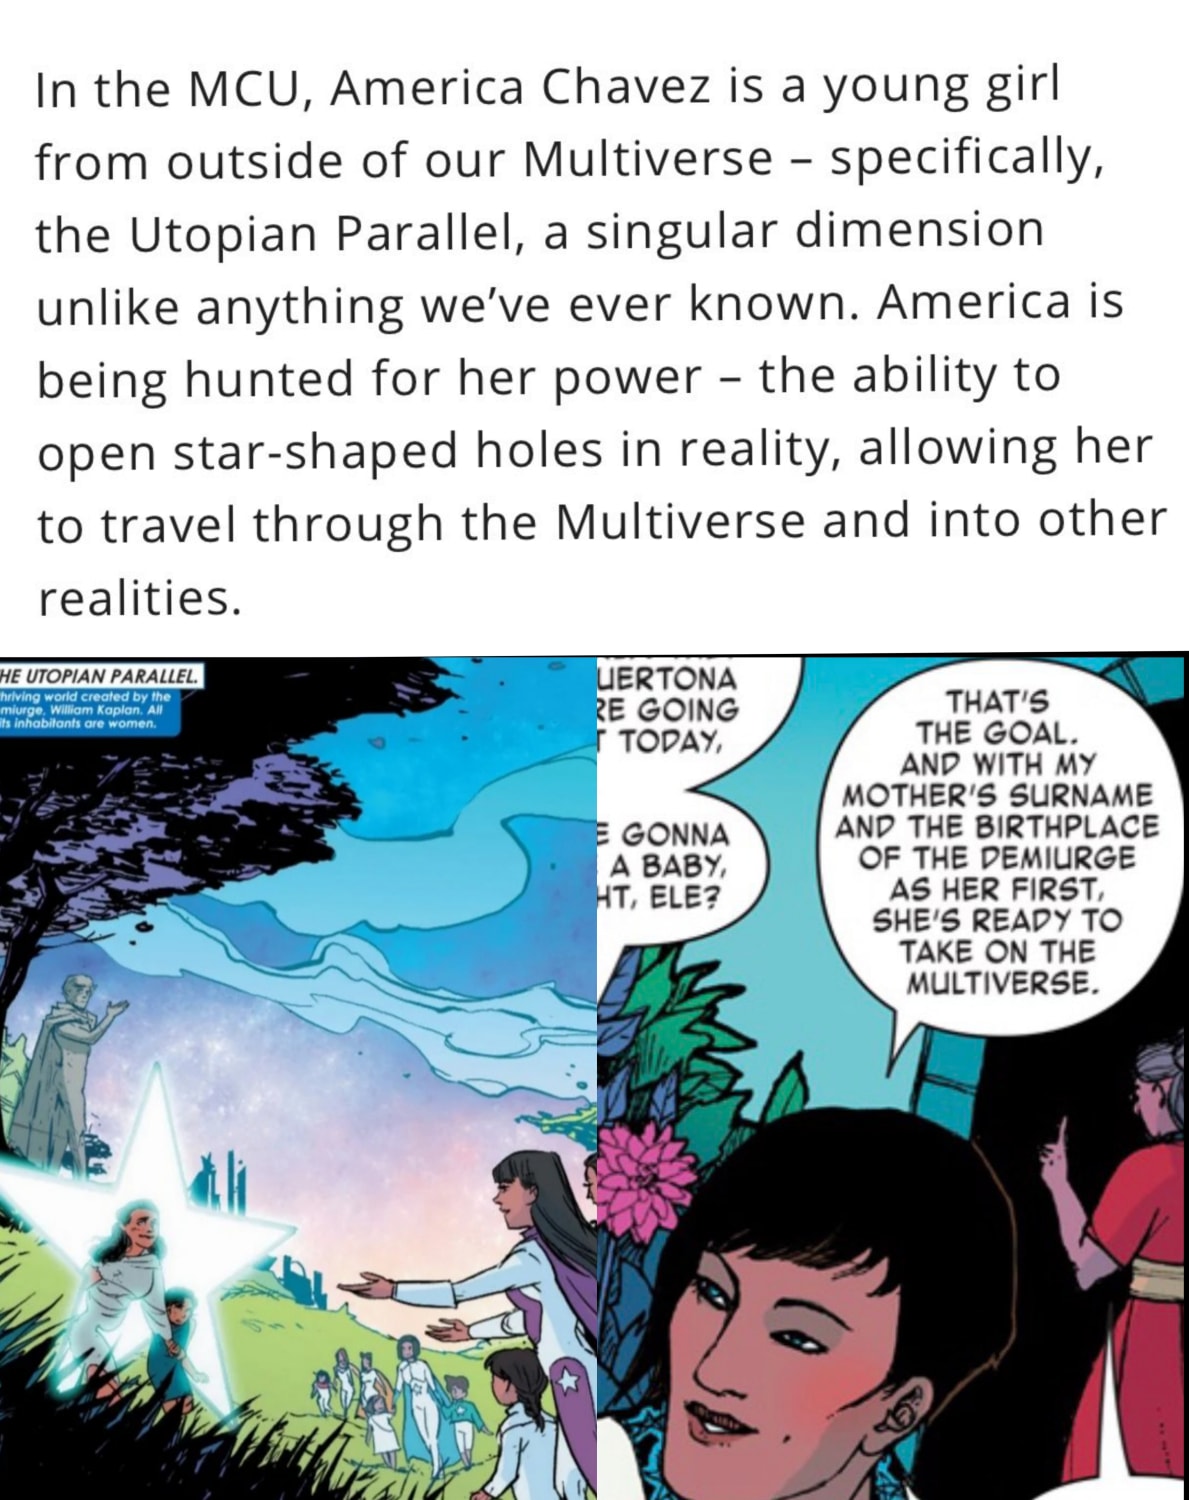 A summary released by Marvel Studio indicates that America Chavez's origin to the Utopian Parallel will be MCU canon eventhough it was retconned by Marvel Comics last year.